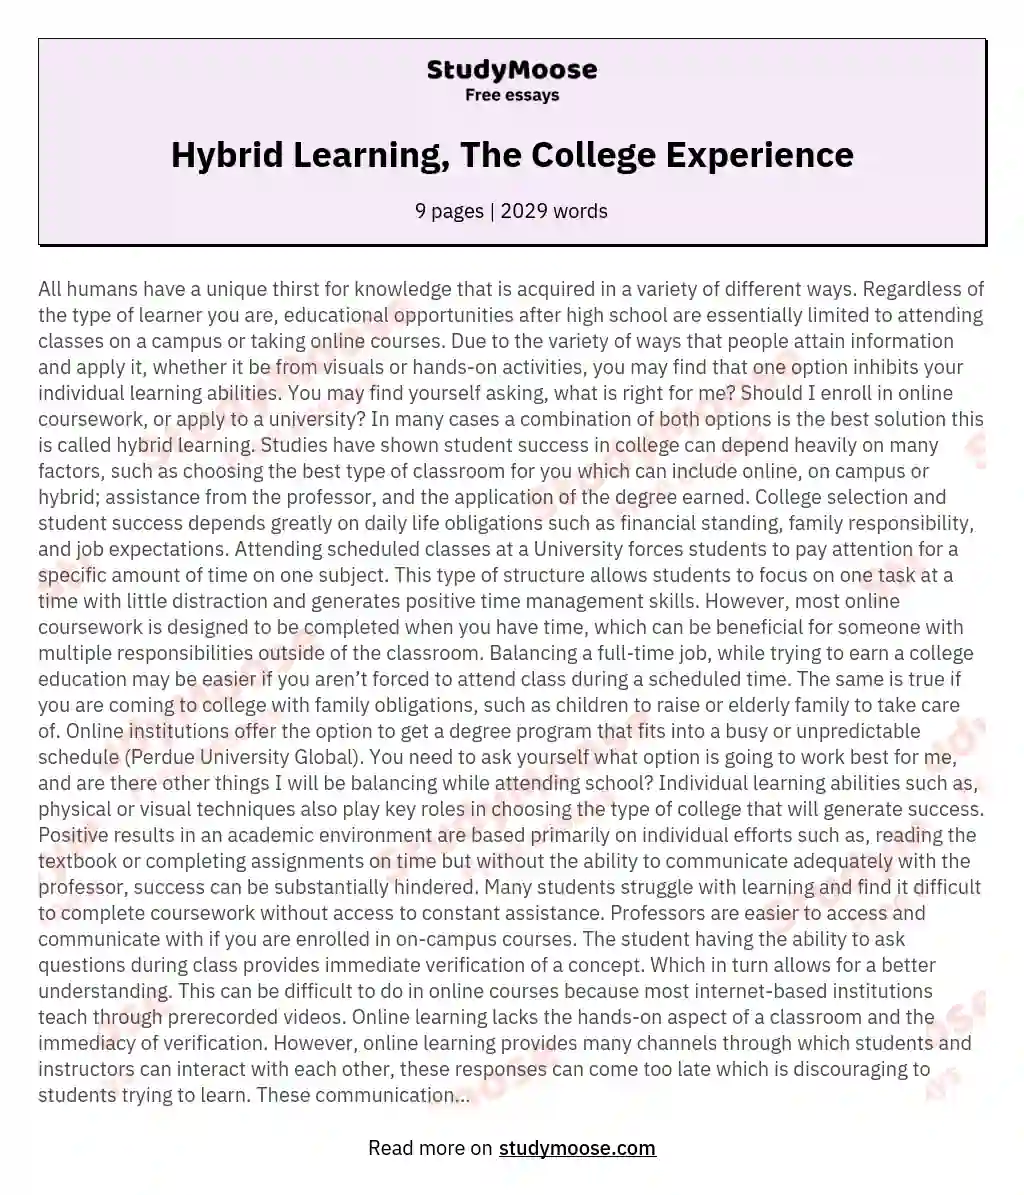 Hybrid Learning, The College Experience